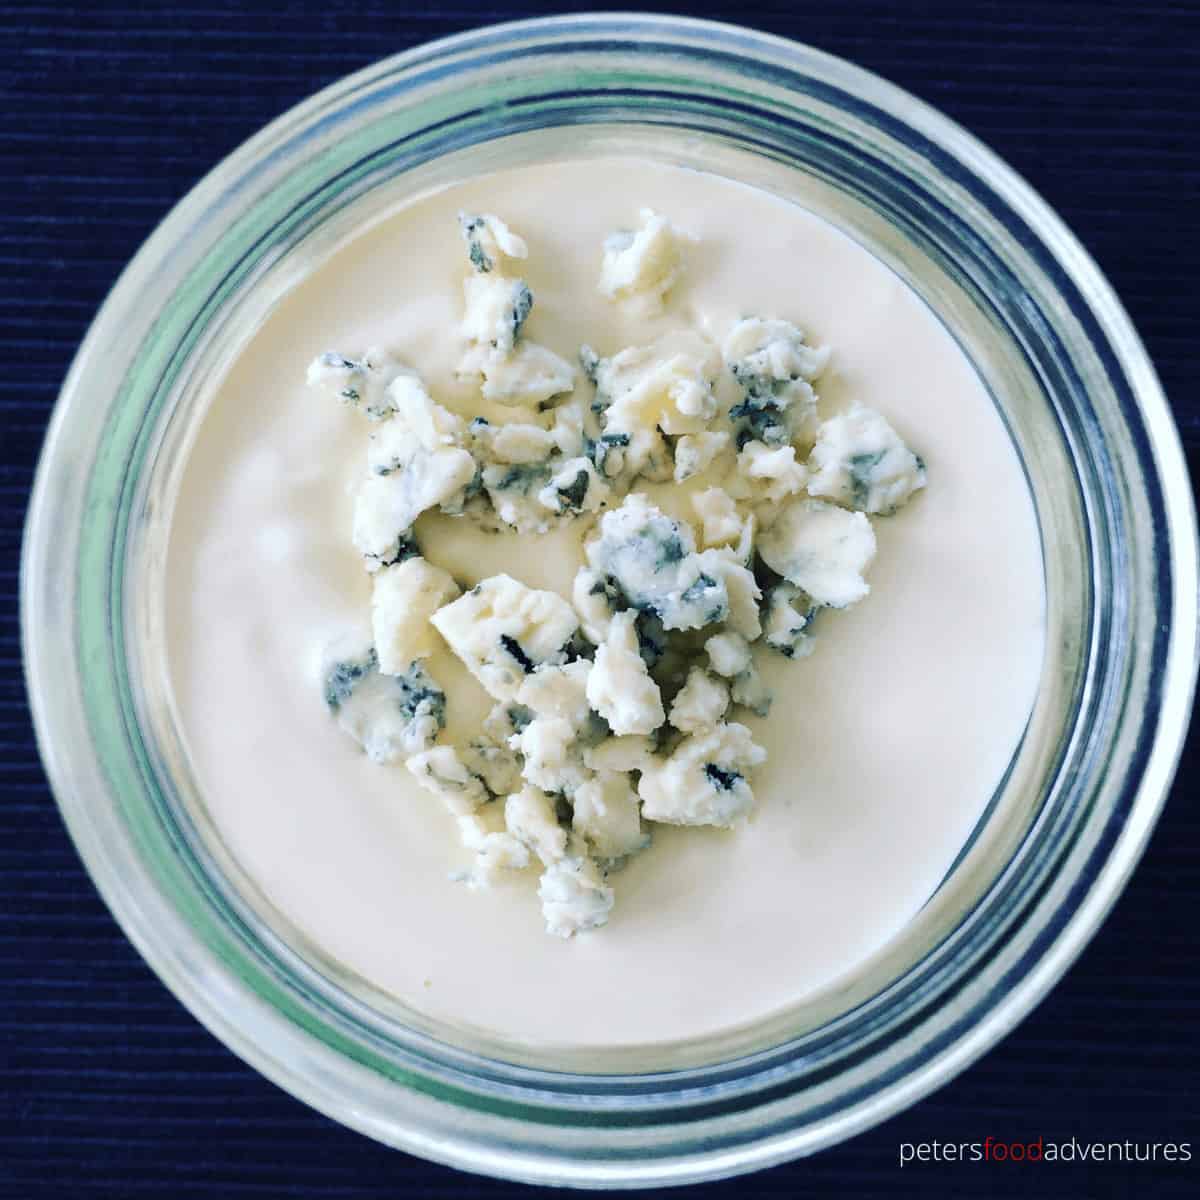 After trying this Homemade Blue Cheese Dressing Recipe, you'll never buy store-bought again. The best part is that it only takes 5 minutes to make! Perfect for salads, veggies or even on a baked potato.